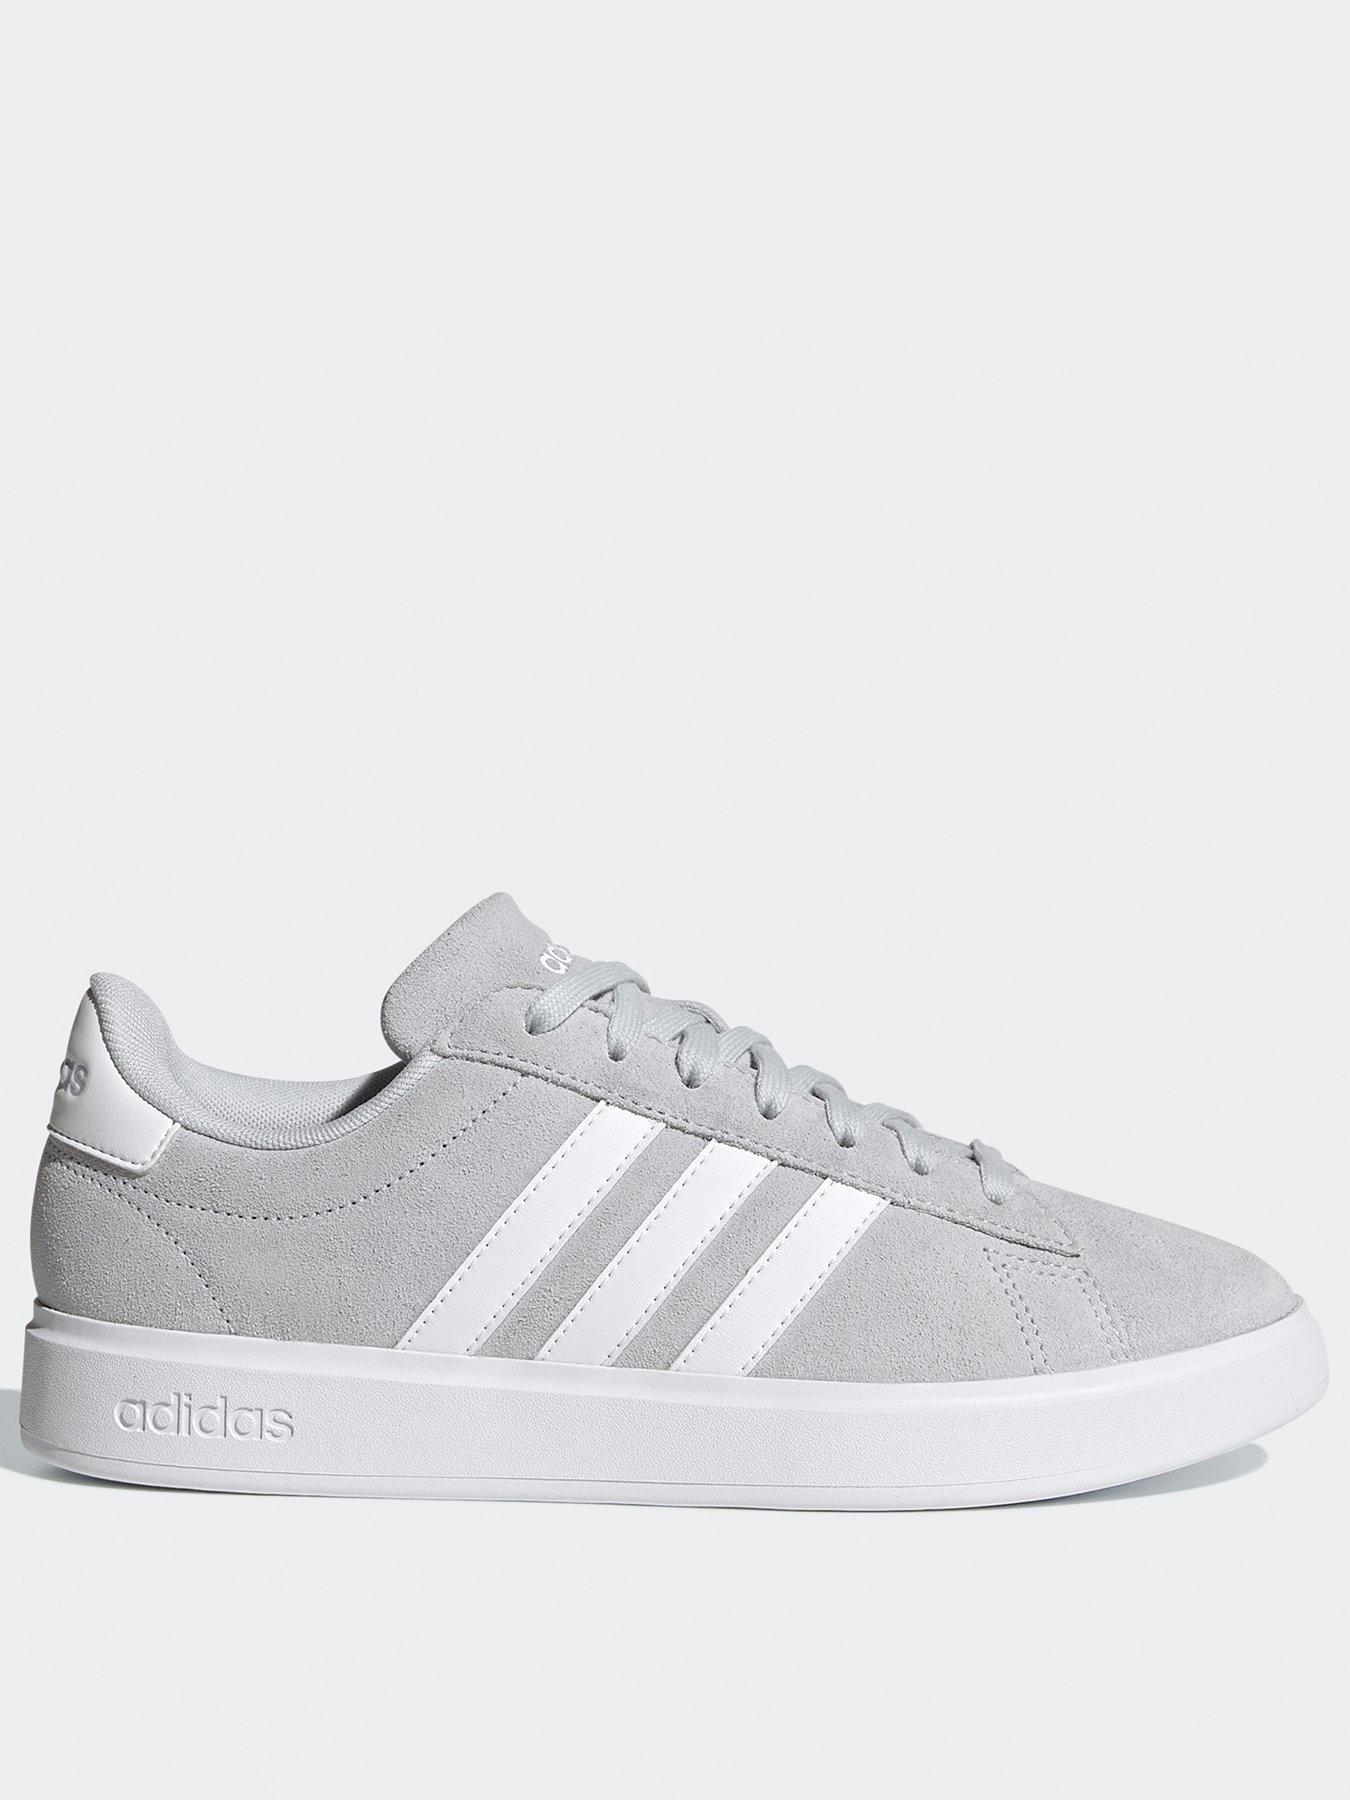 adidas knit shoes white sandals boots sale free, Women's Underwear. Find  Casual & Sporty Underwear for Women, Offers, Stock